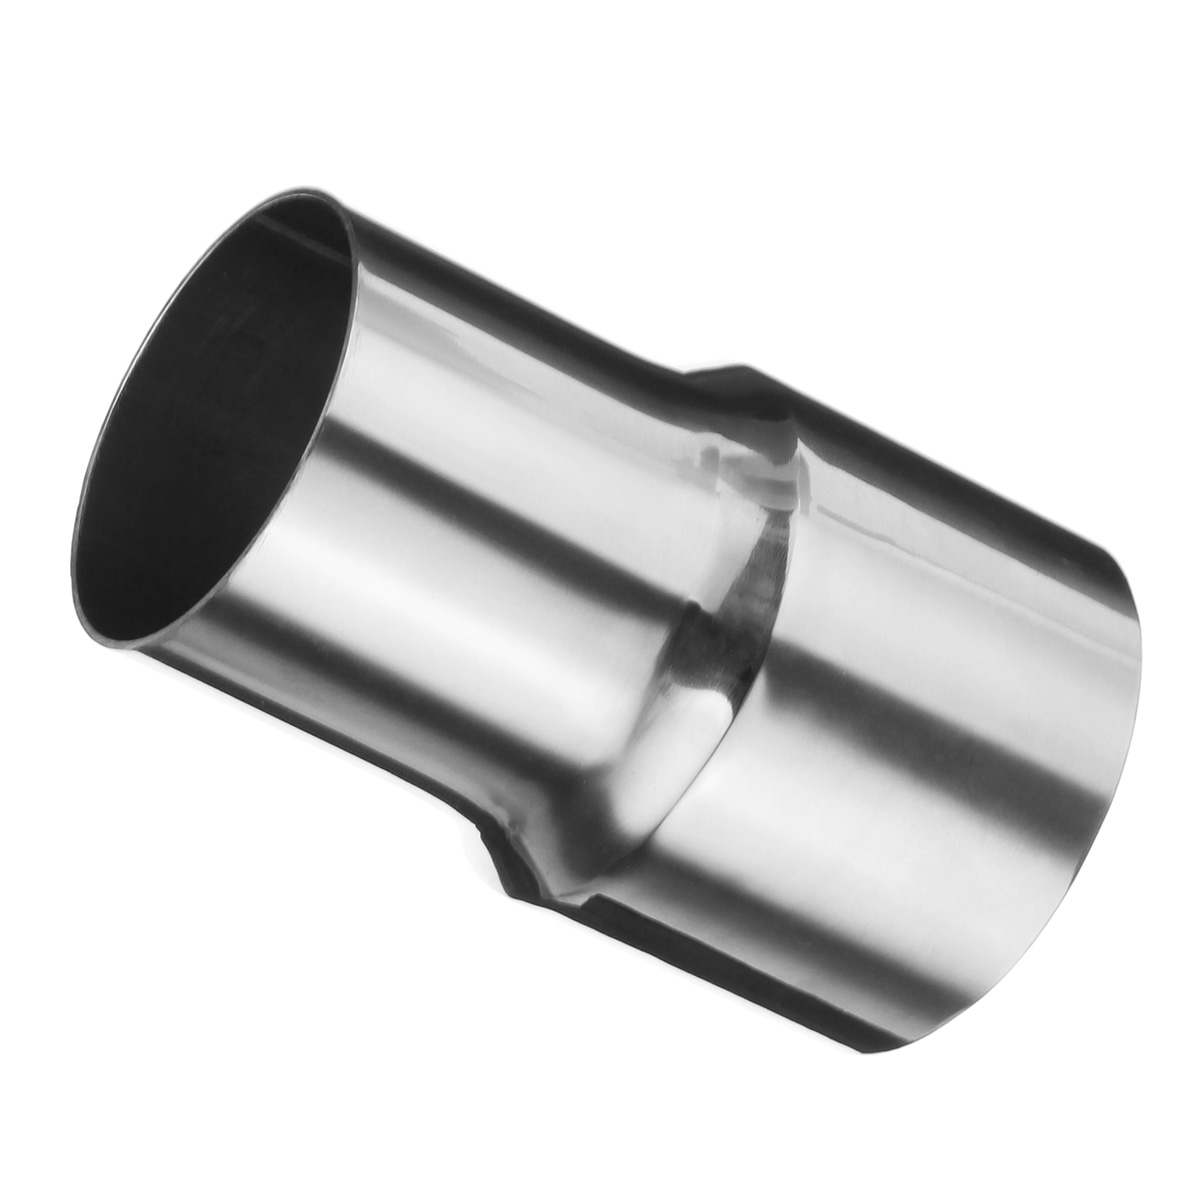 25-Inch-To-2-Inch-Stainless-Steel-Flared-Turbo-Exhaust-Reducer-Connector-Pipe-Tube-1632493-6